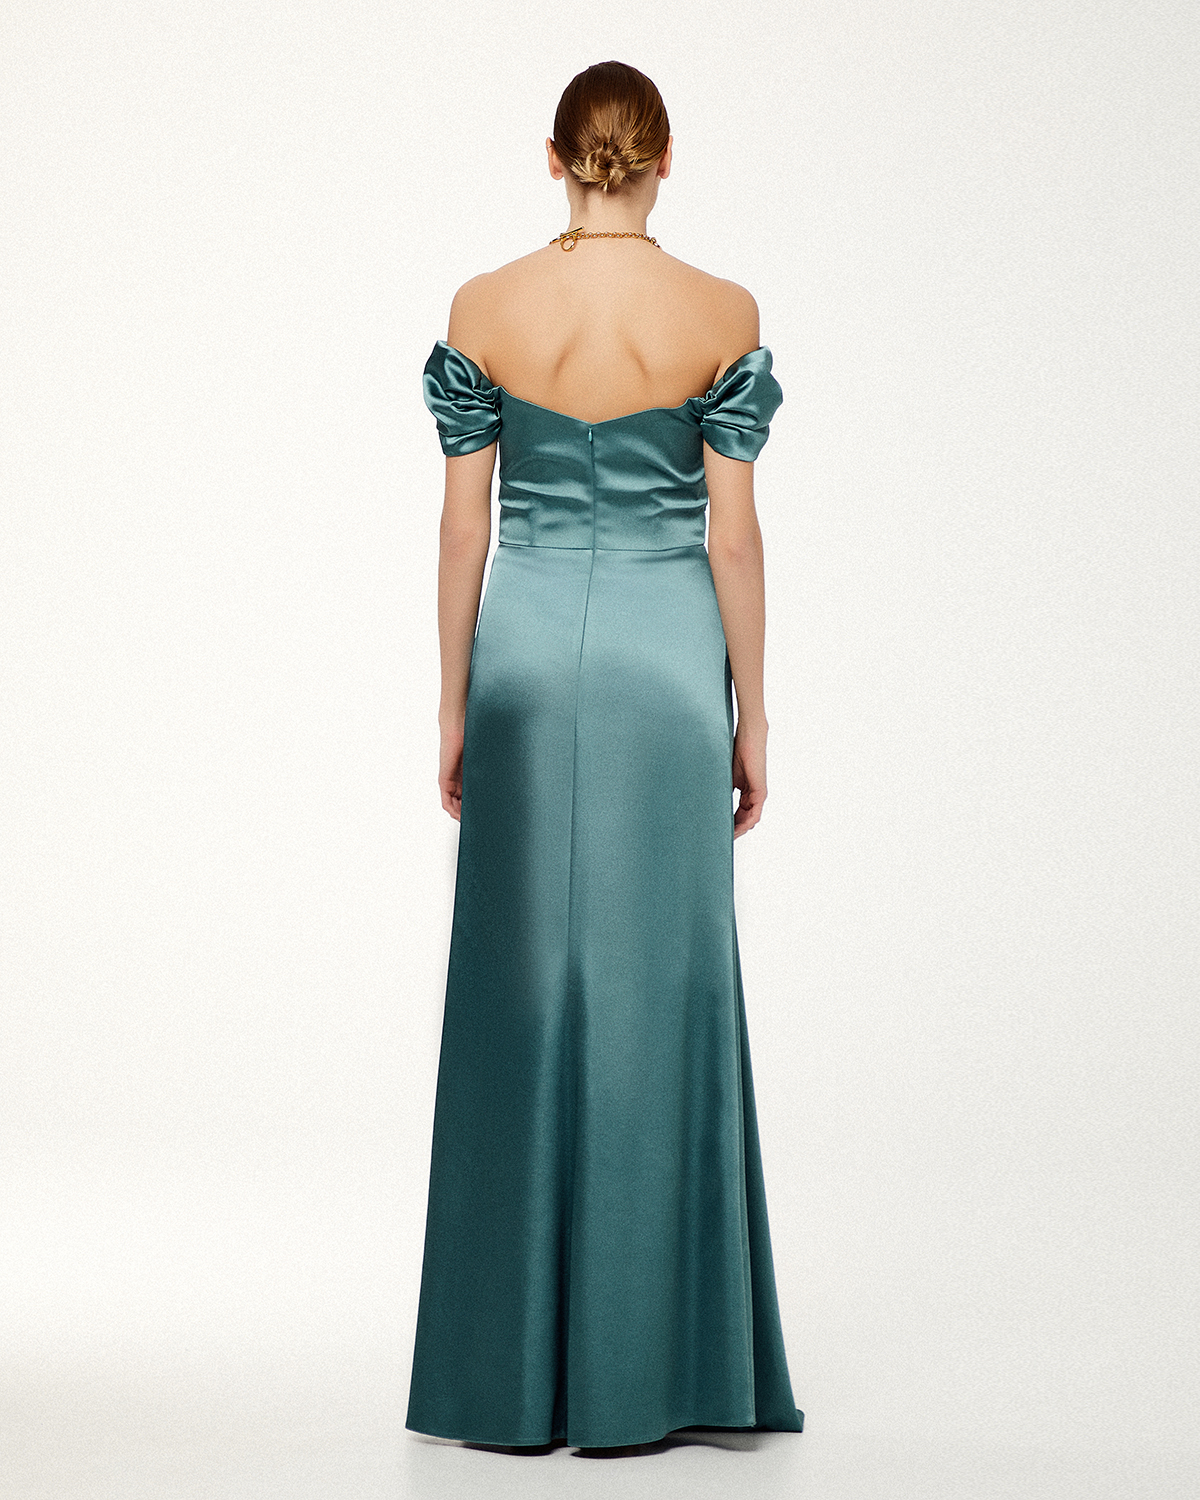 Long cocktail satin dress with sleeves